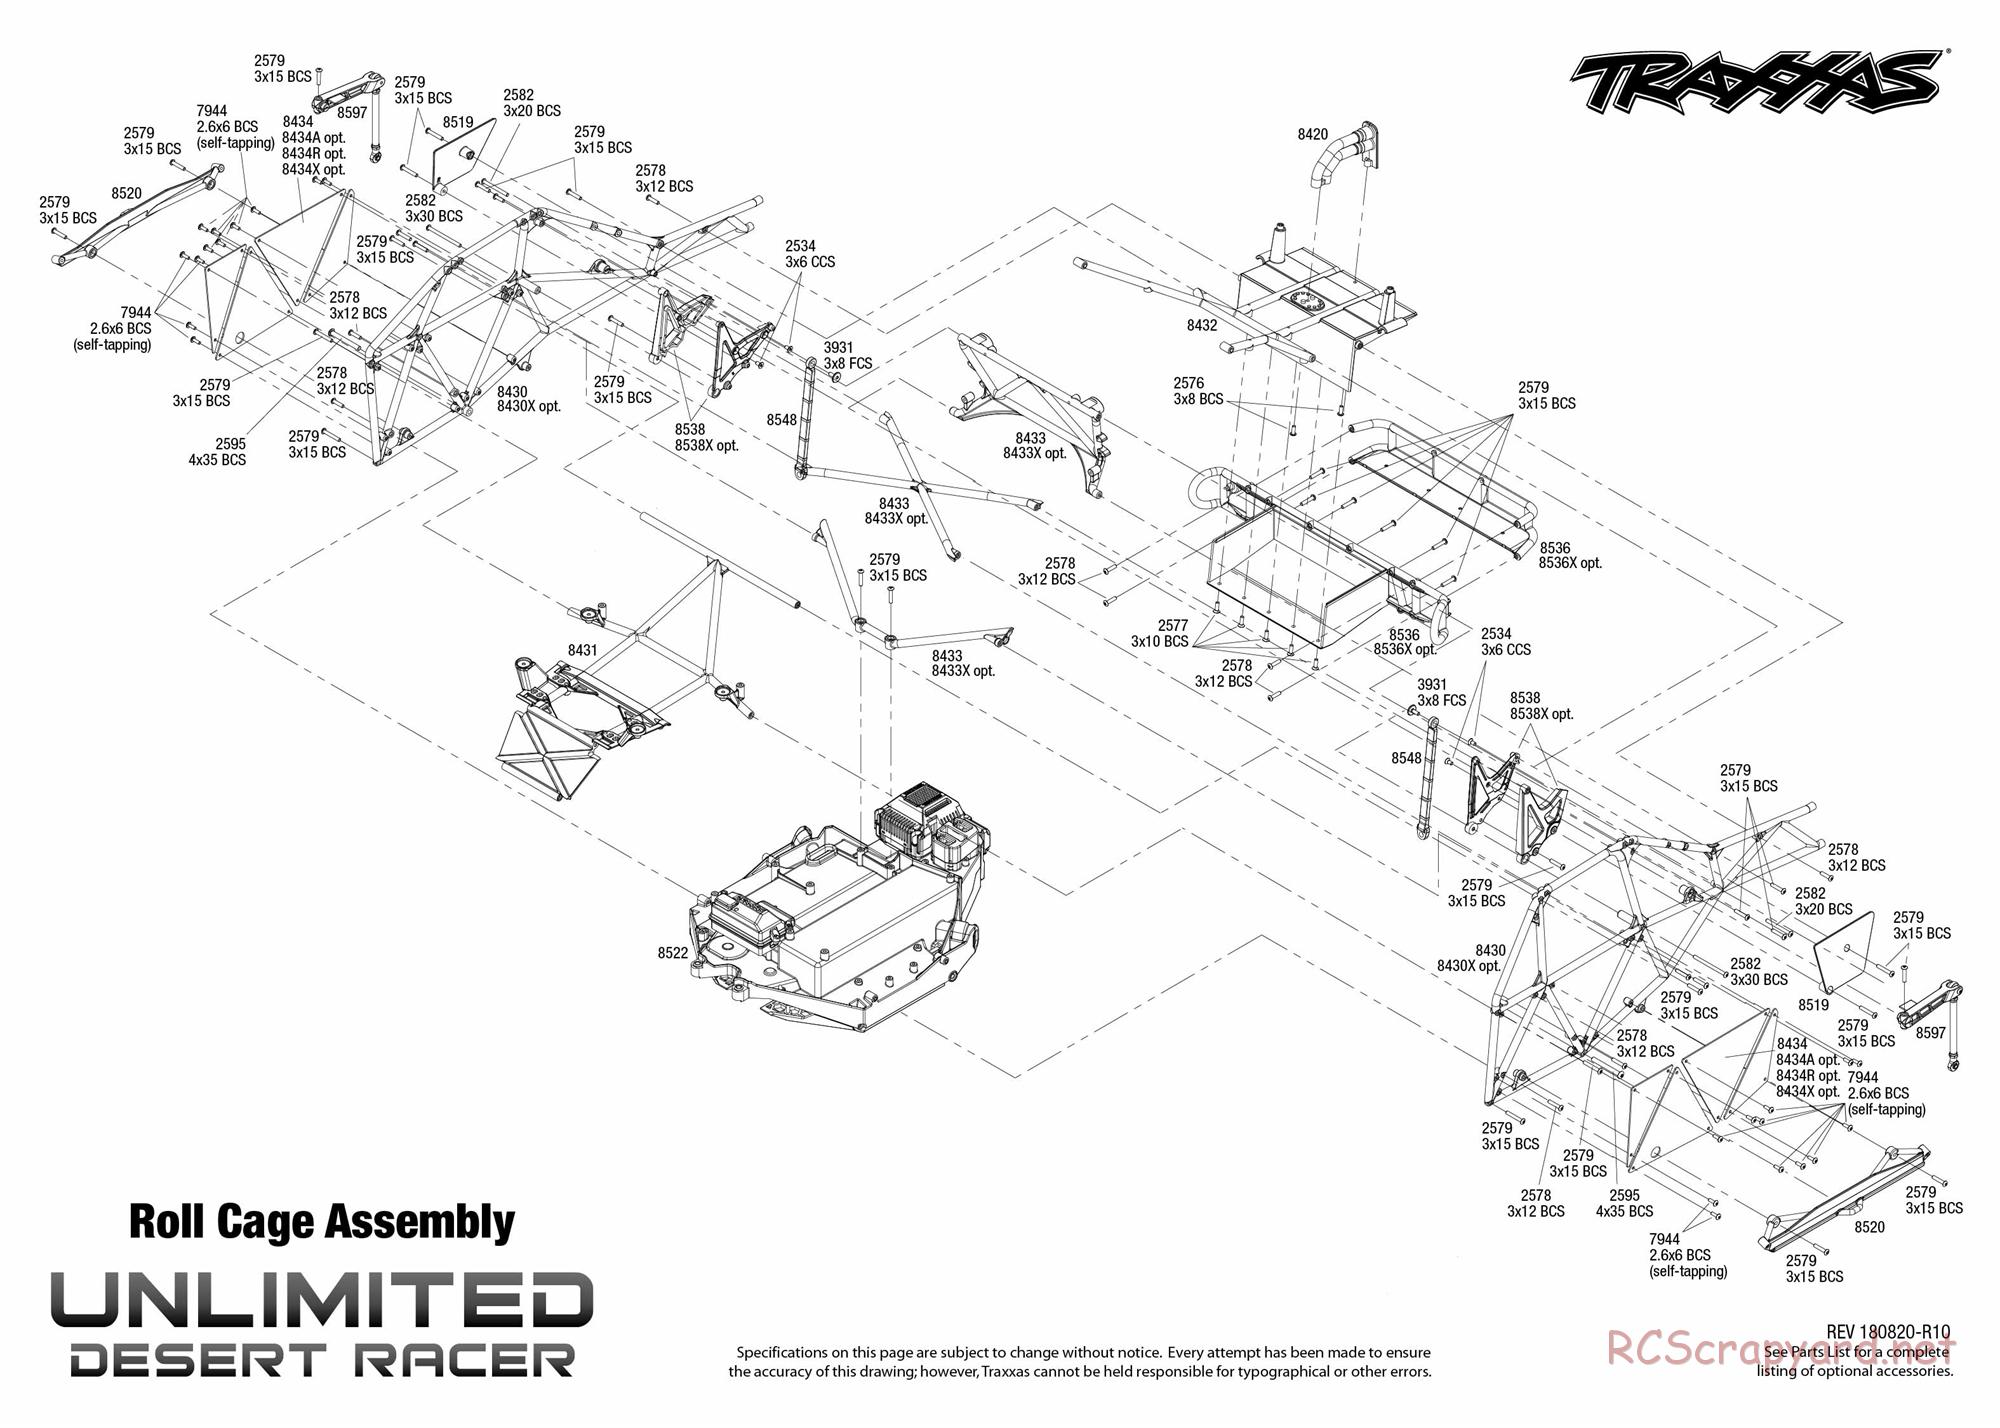 Traxxas - Unlimited Desert Racer VXL TSM (2018) - Exploded Views - Page 6